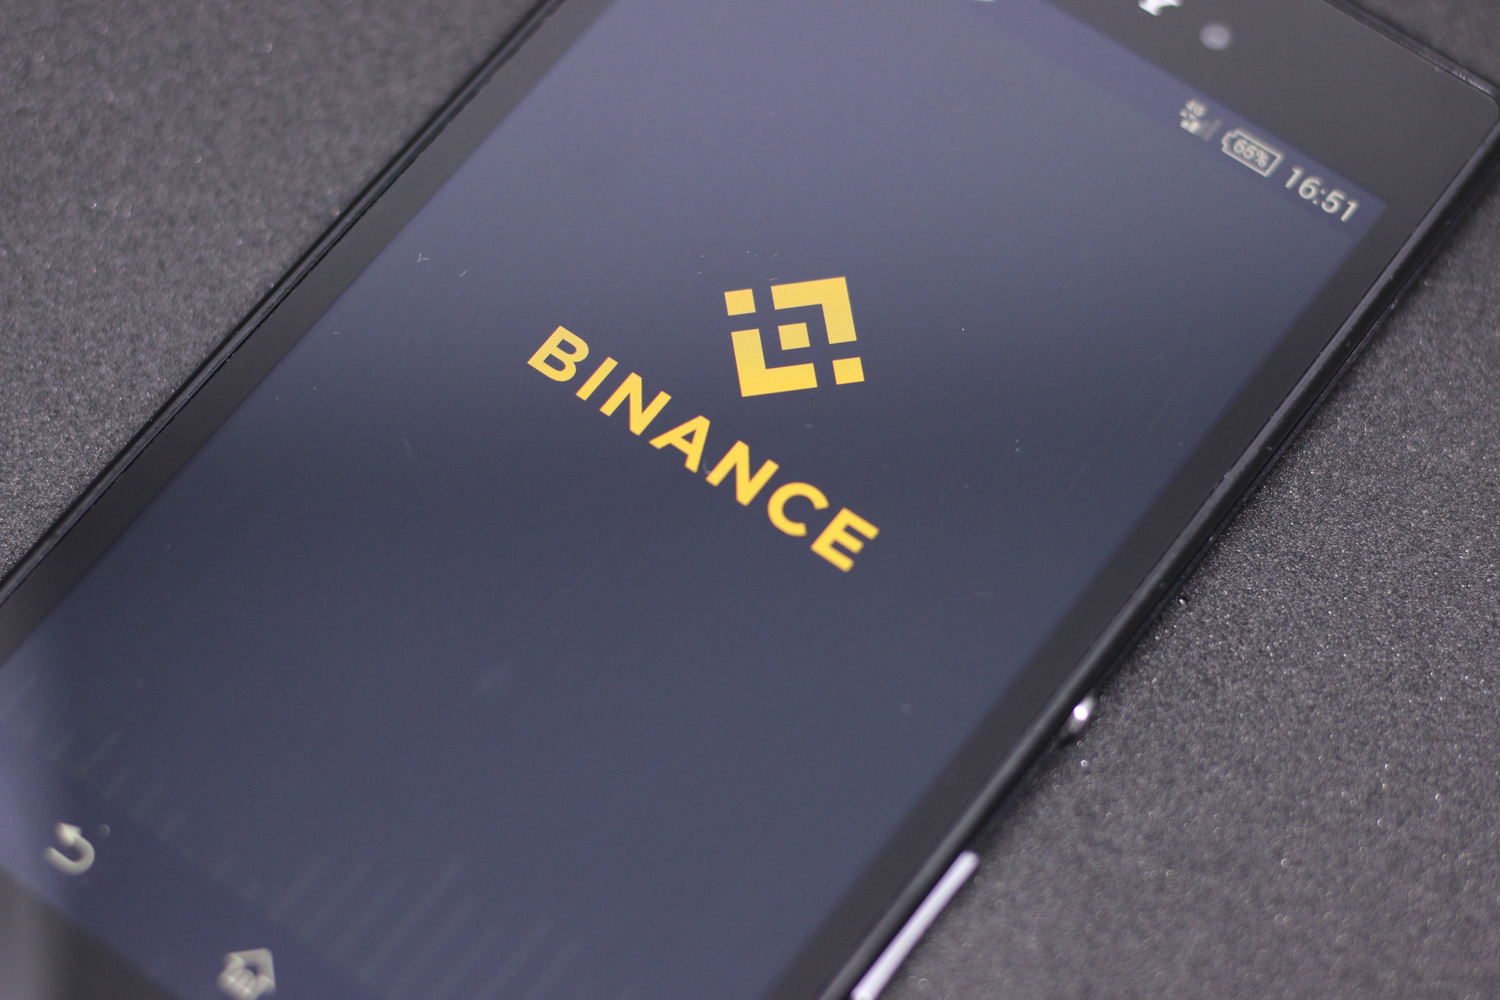 Crypto Exchange Binance Confirms Margin Trading Coming ‘Soon’: Report